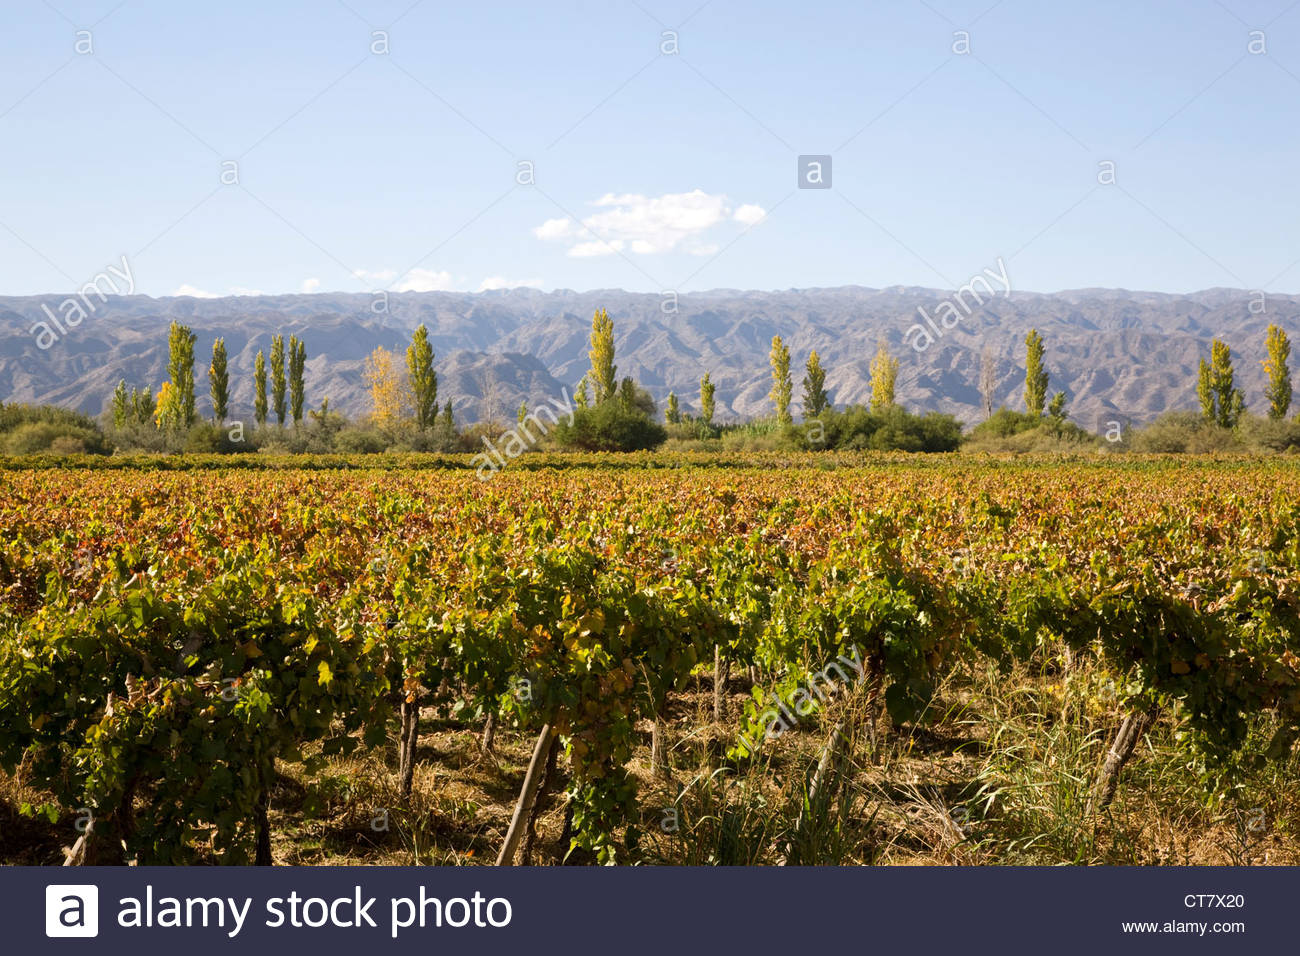 Vineyard Or Winery With Syrah Vines And Mountains In The